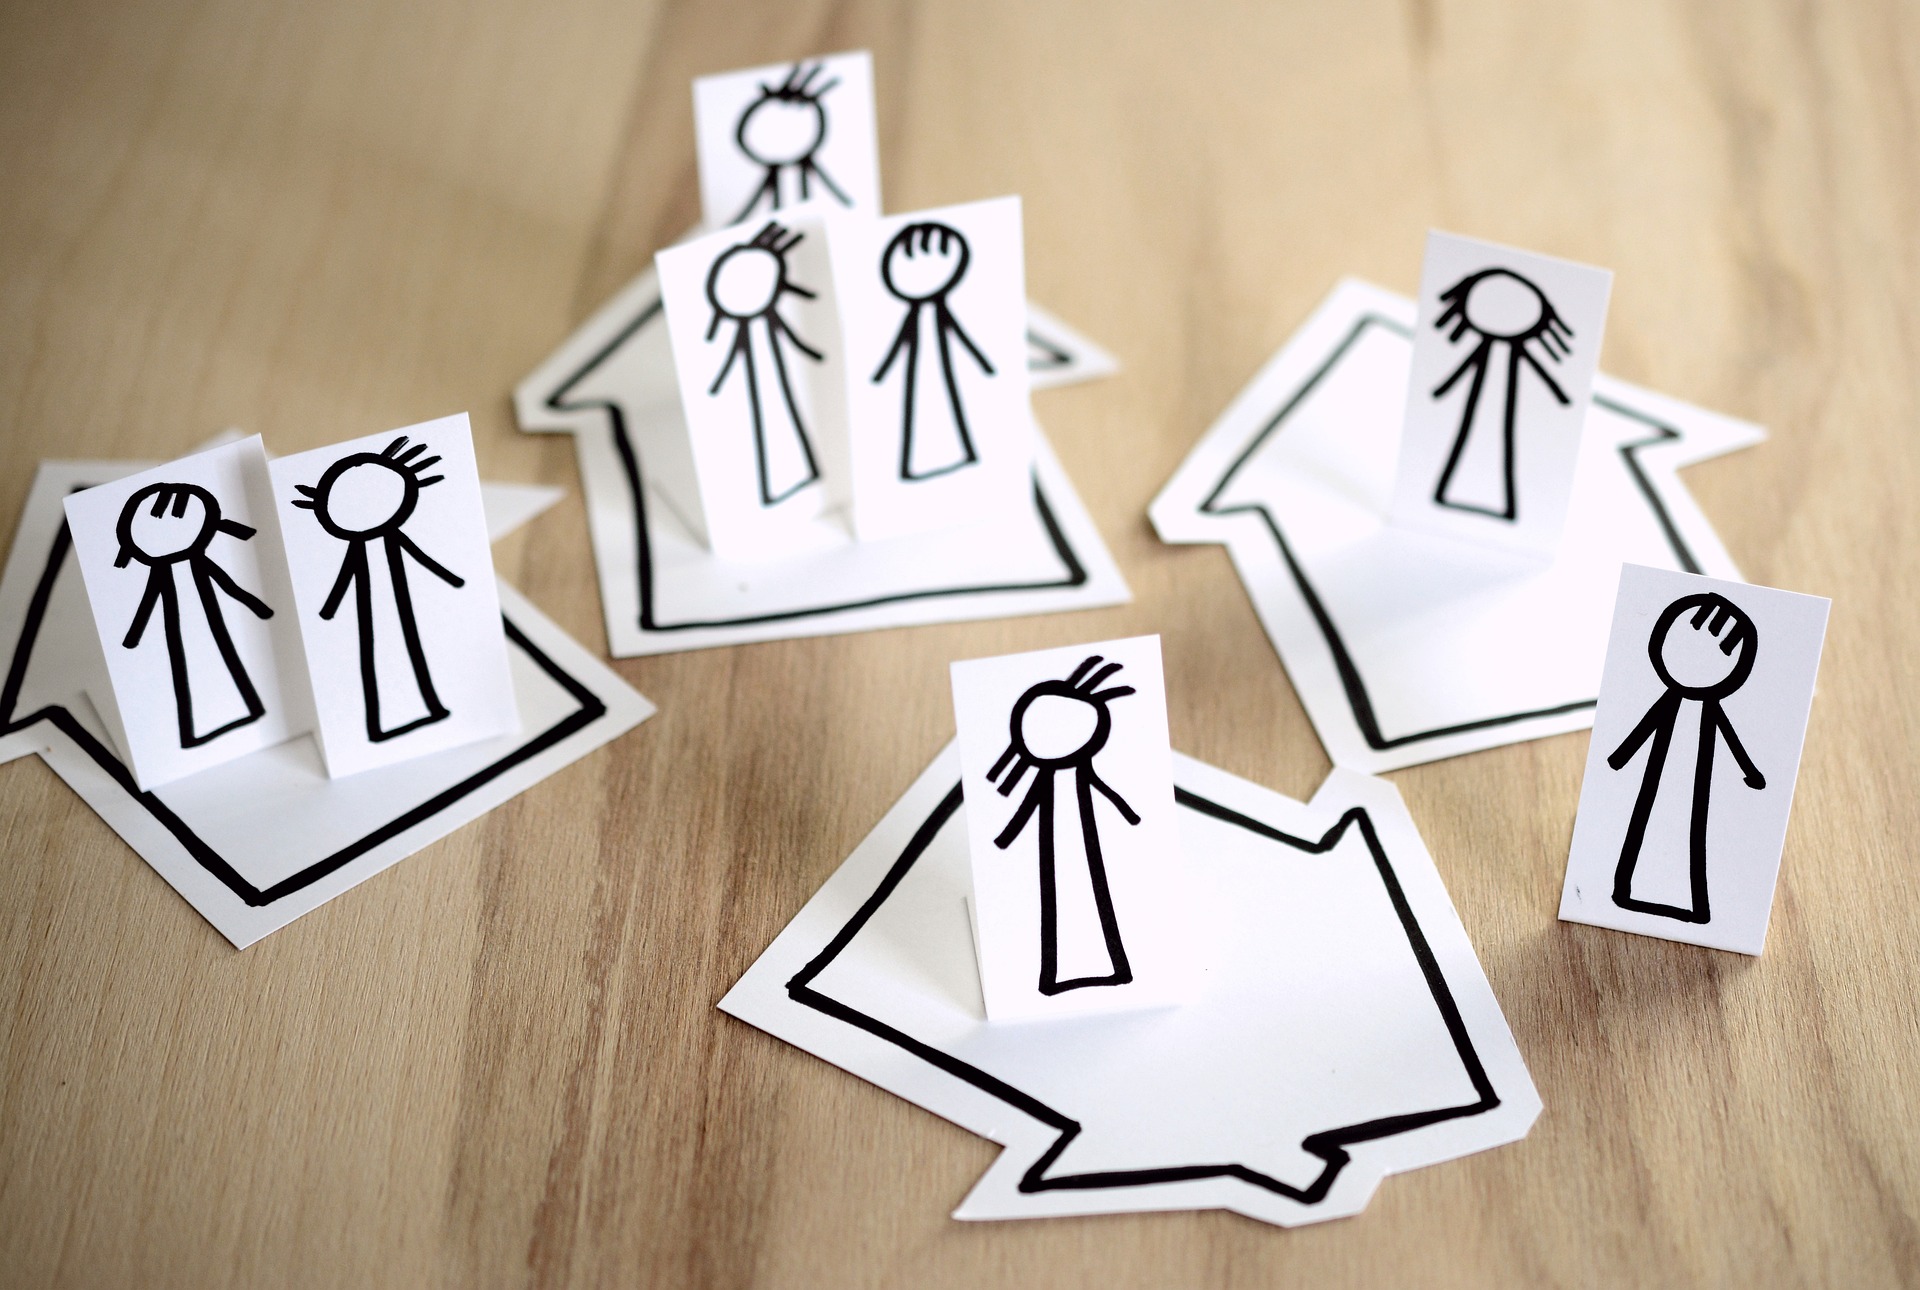 Paper cut-outs of people, placed on top of cut outs of different houses; our Probate Solicitors in Preston discuss the intestacy rules and how we can assist with your loved one's estate.